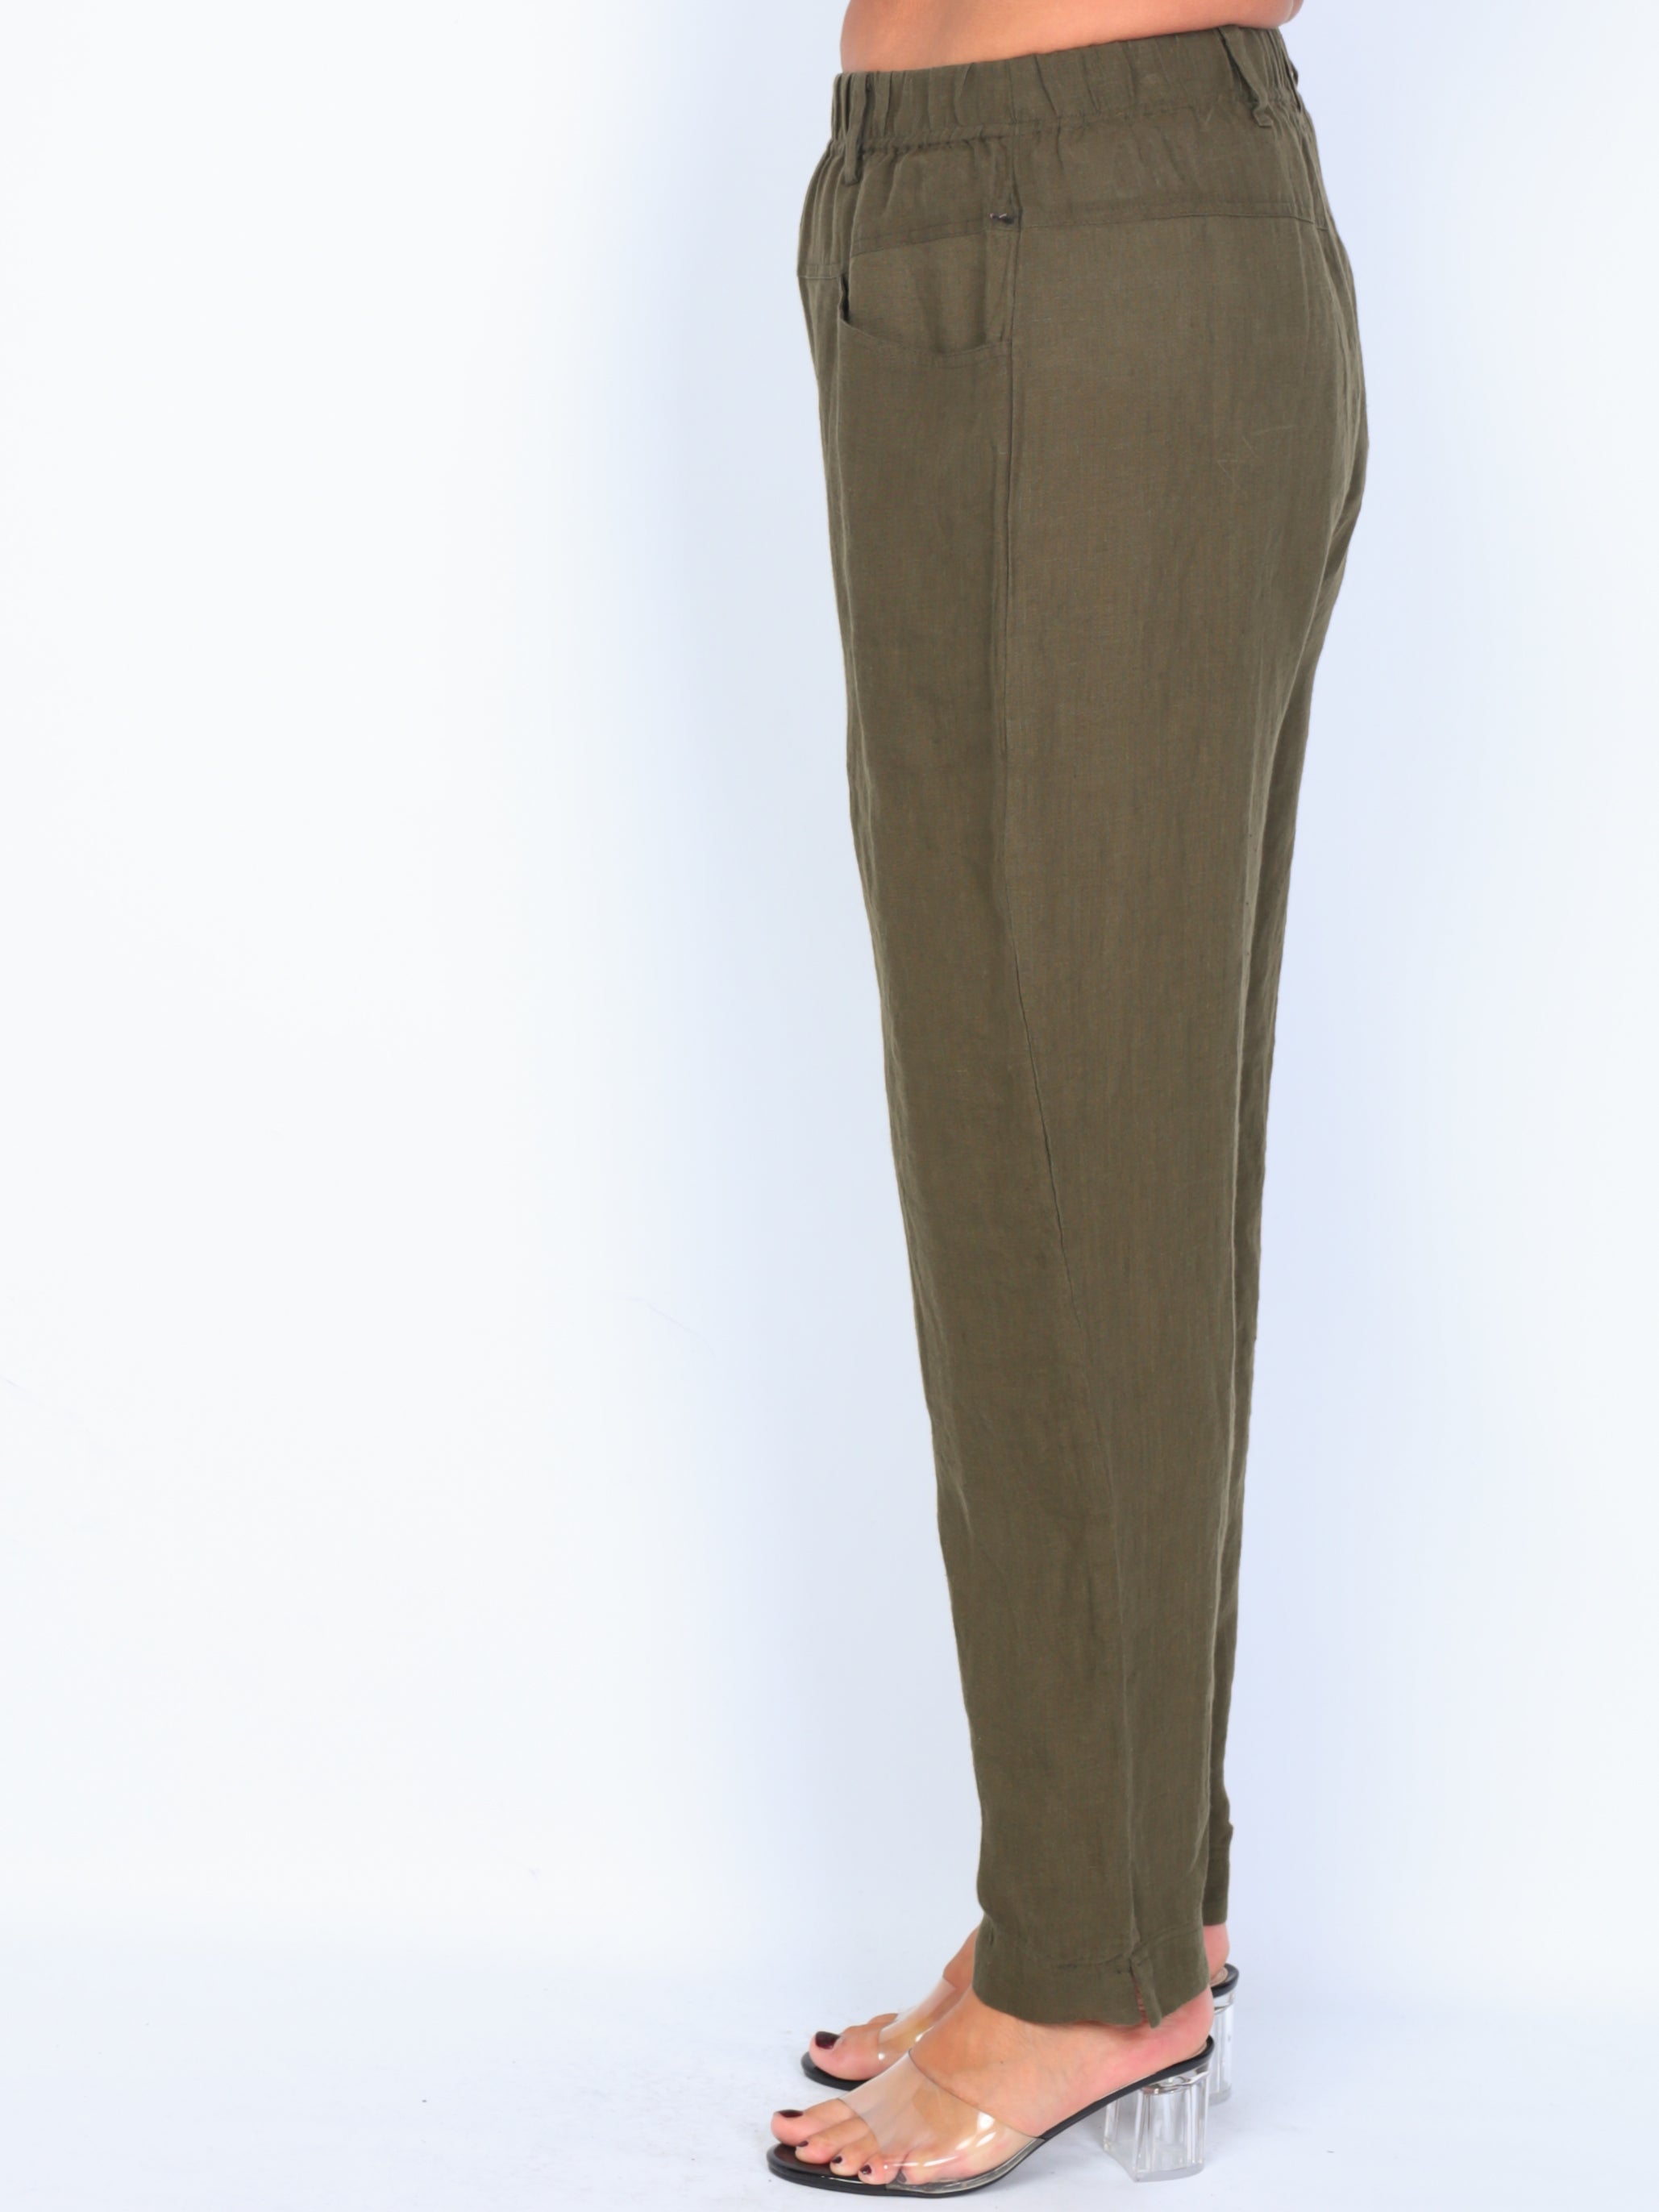 Some linen trousers with pockets